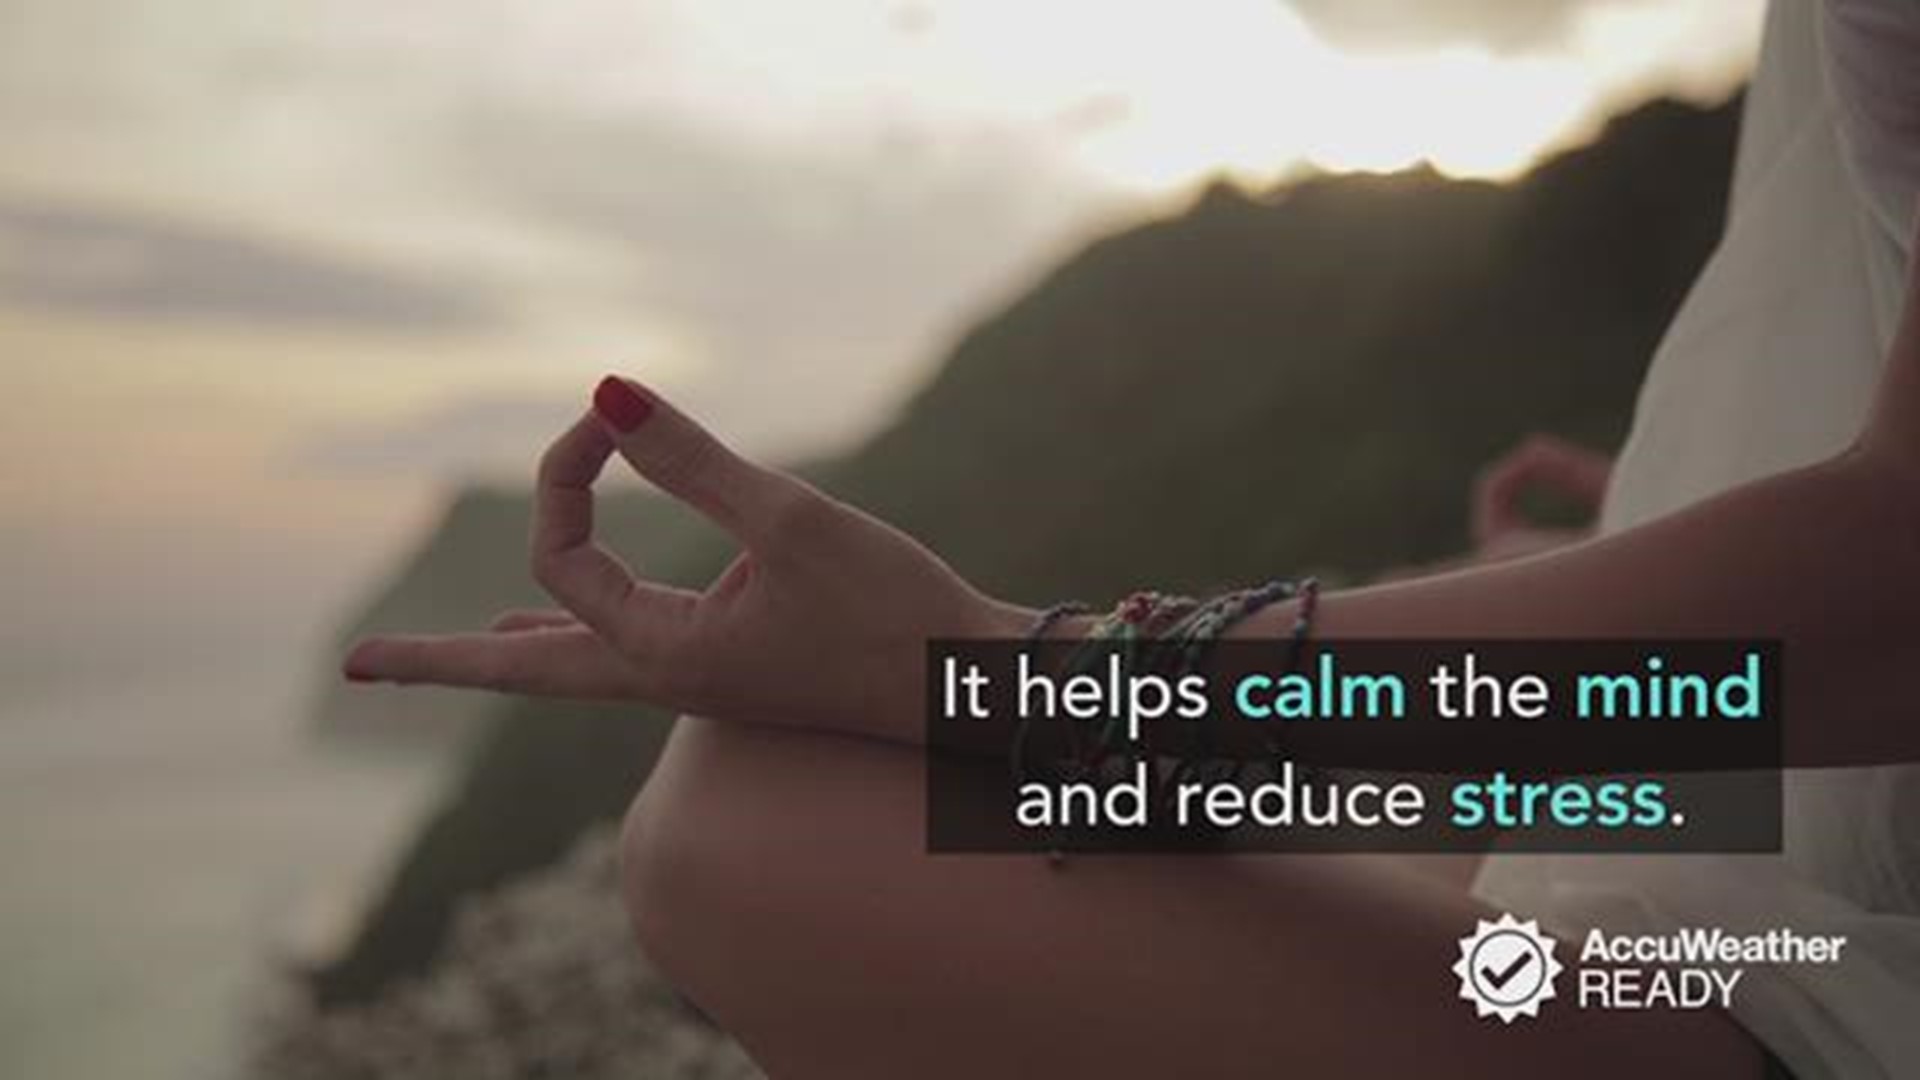 Studies show that meditation can help reduce feelings of depression, anxiety and even physical pain following trauma related to surviving a disaster.